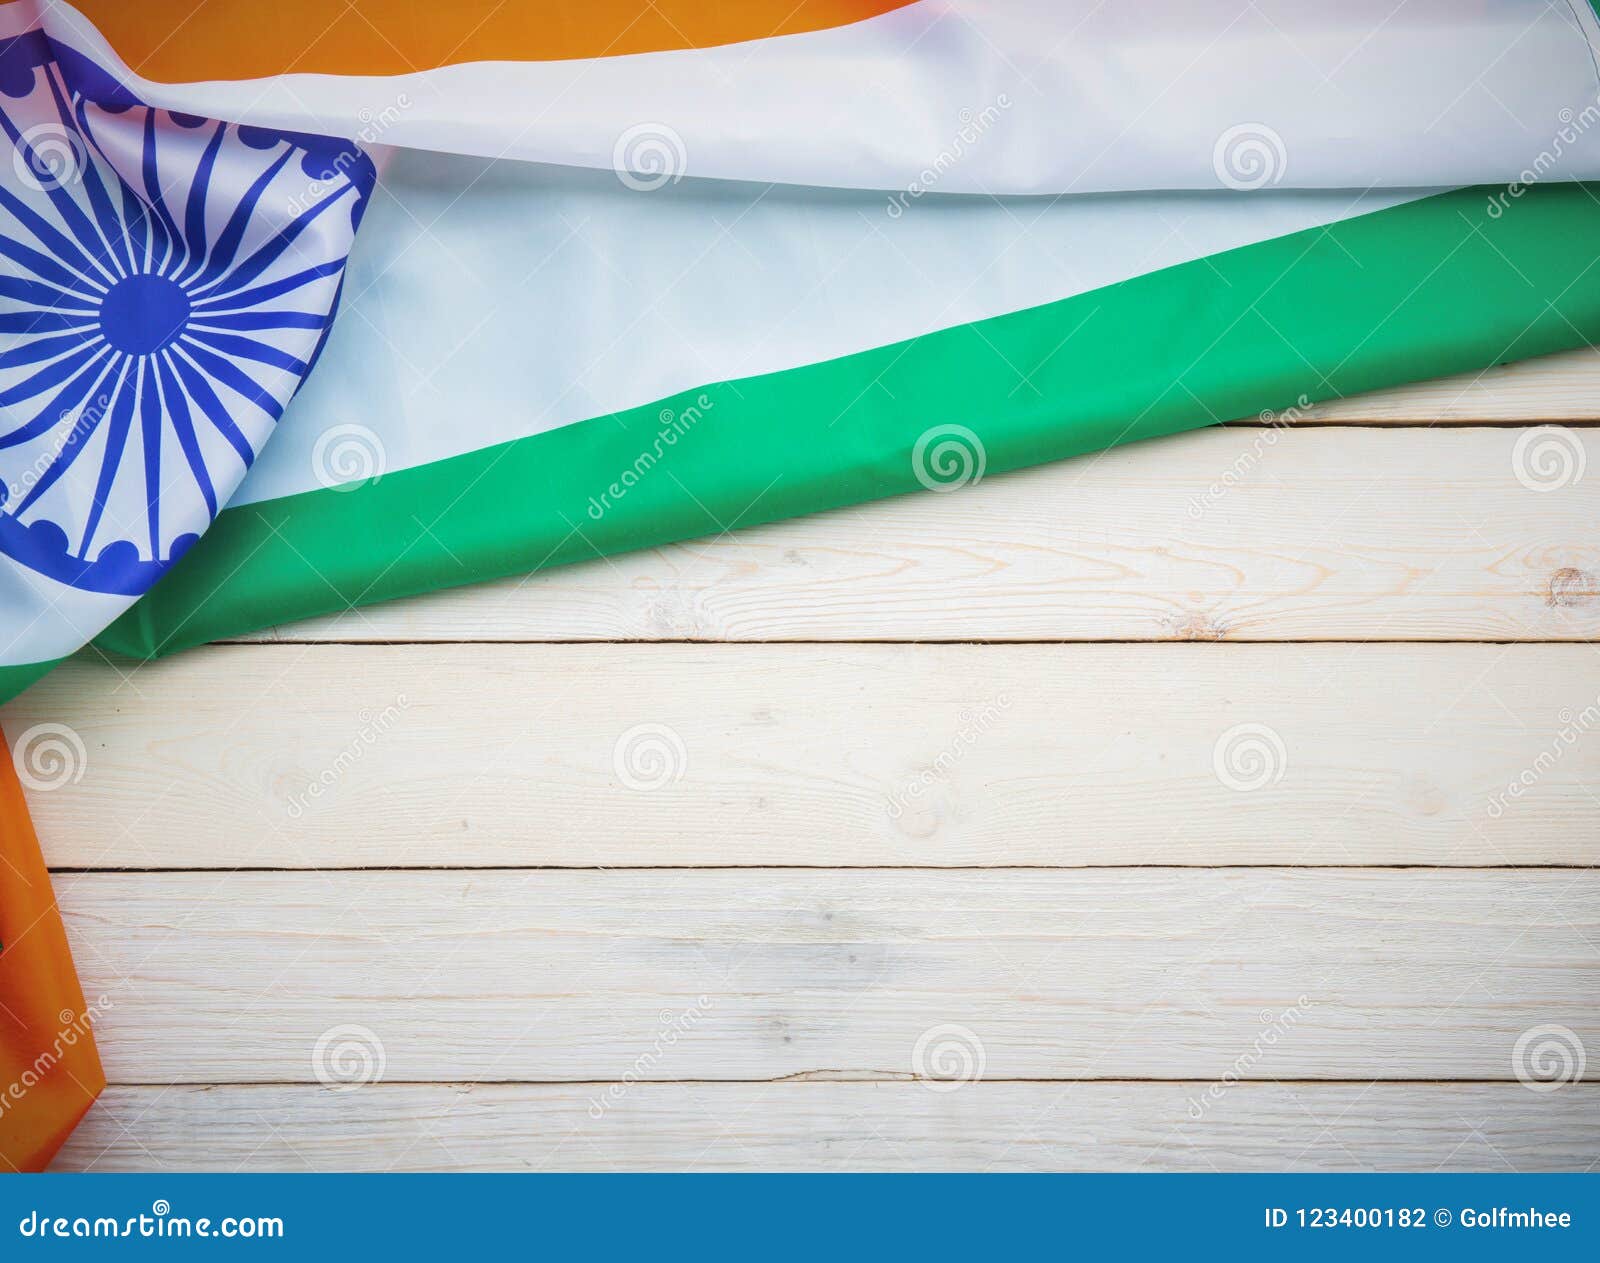 India Flag on Wood Texture Background Concept for 15 August Independence  Day Wallpaper, Happy 26 January Republic Day Banner Stock Photo - Image of  india, country: 123400182